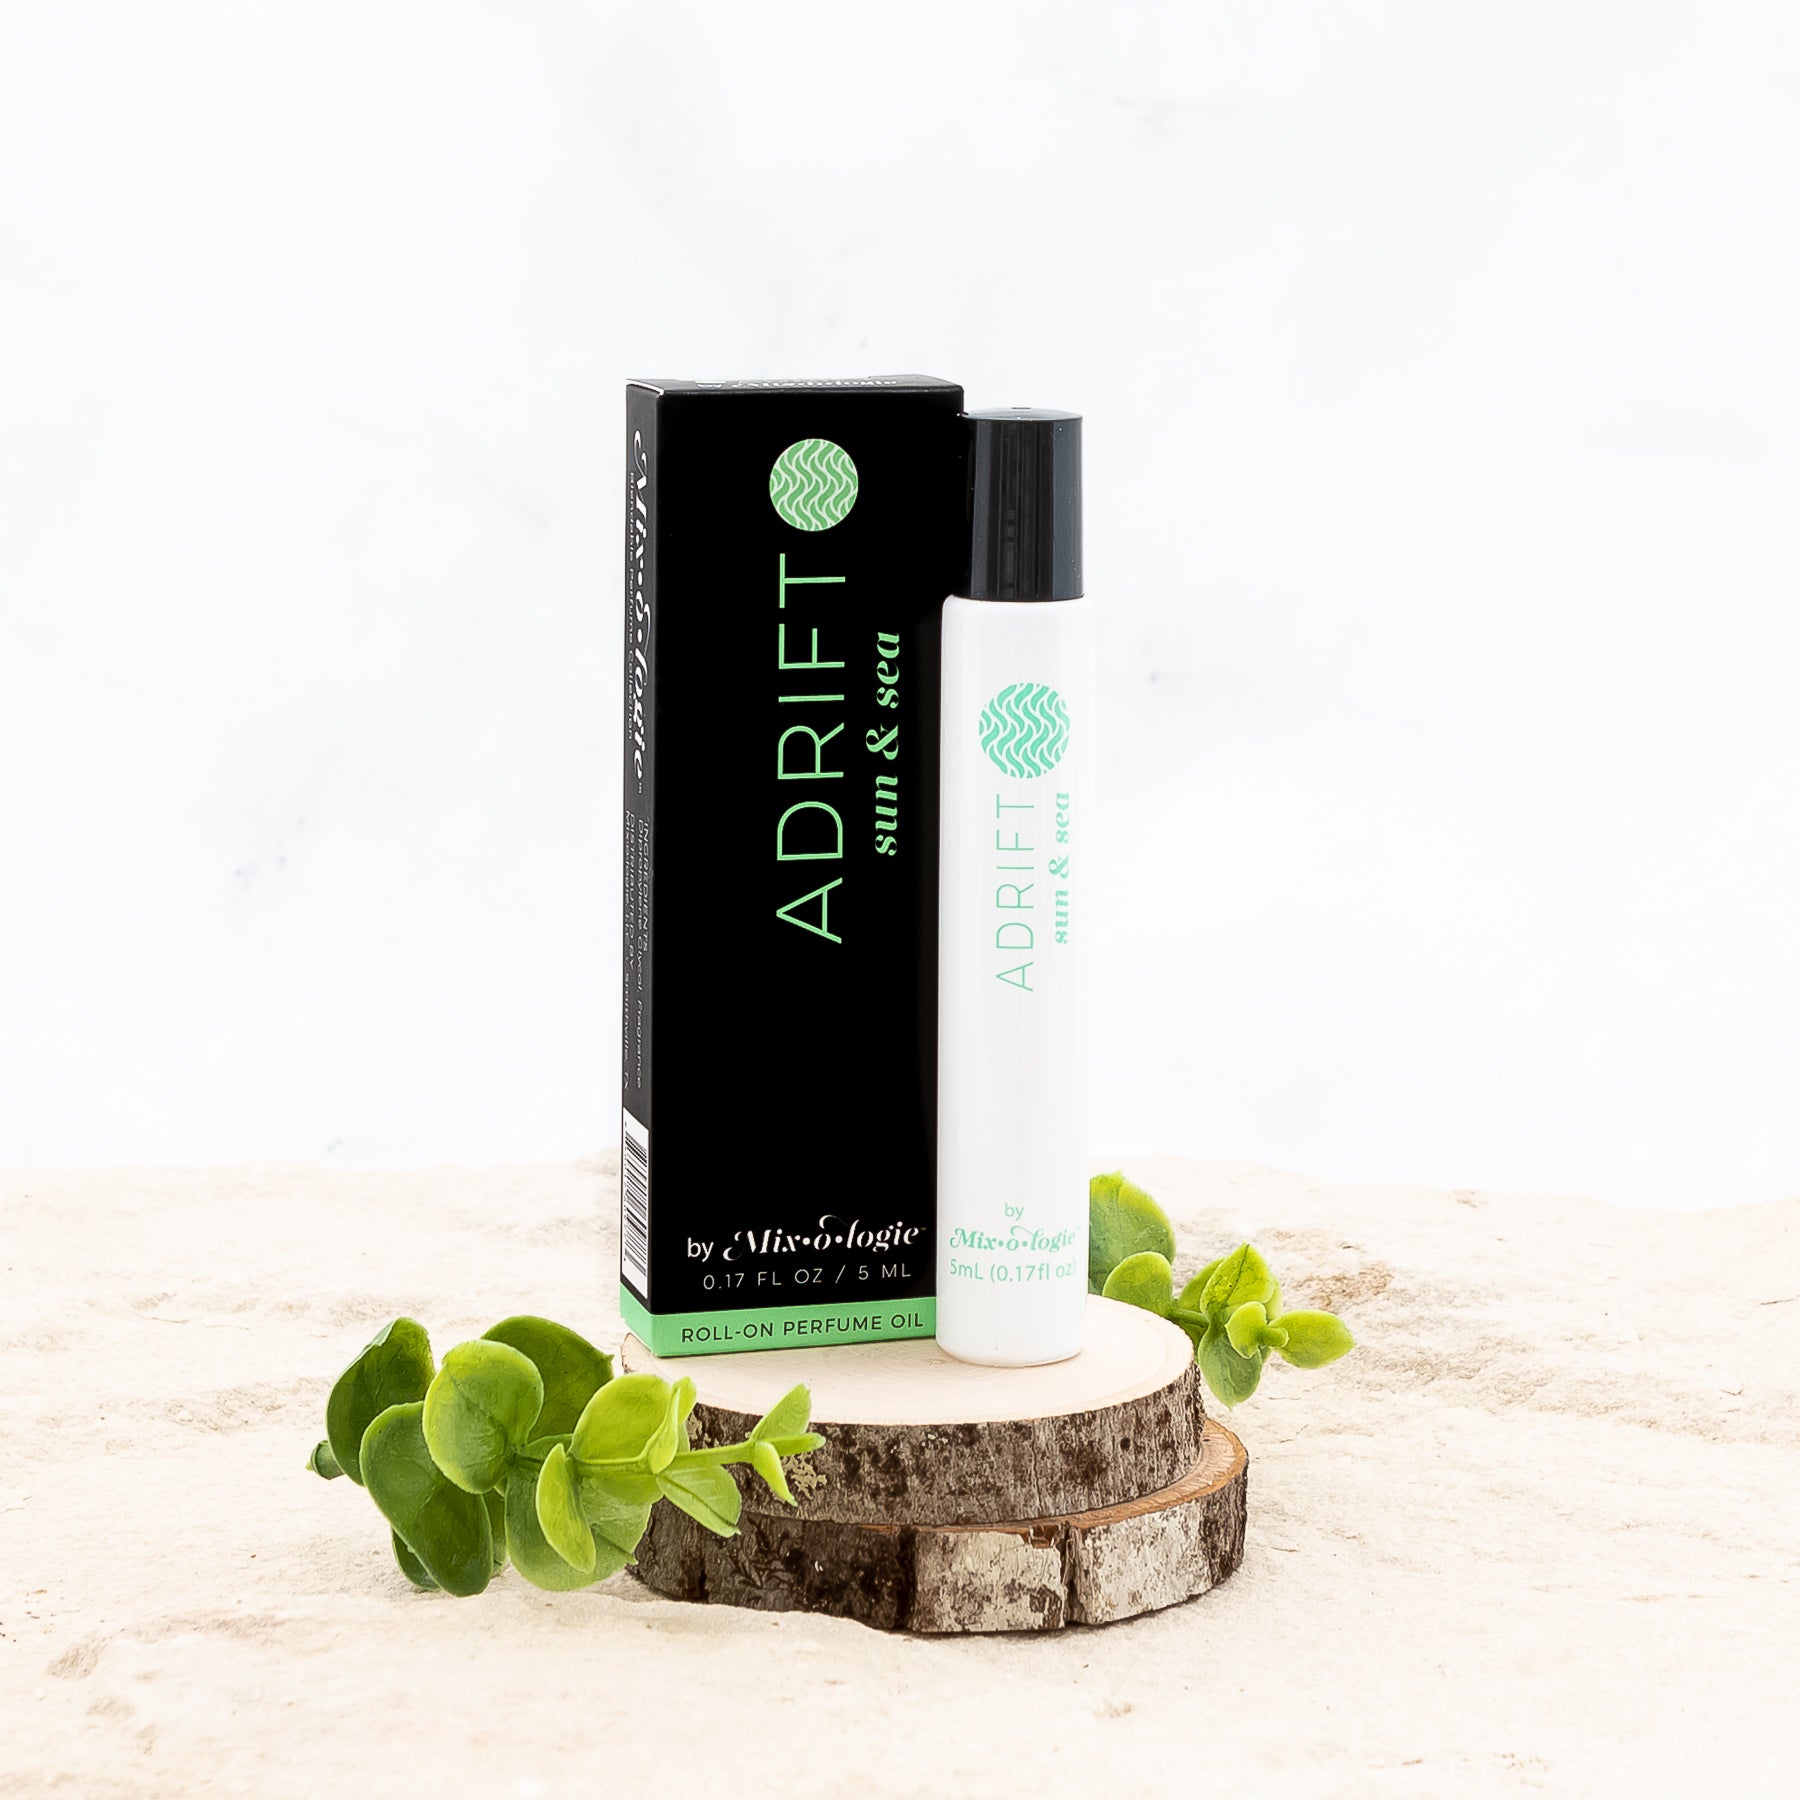 Adrift (Sun & Sea) White cylinder rollerball with light green color lettering with black box and light green color lettering. Rollerball has 0.17 fl oz or 5 mL. Rollerball and rollerball box are on wood in the sand with greenery.  